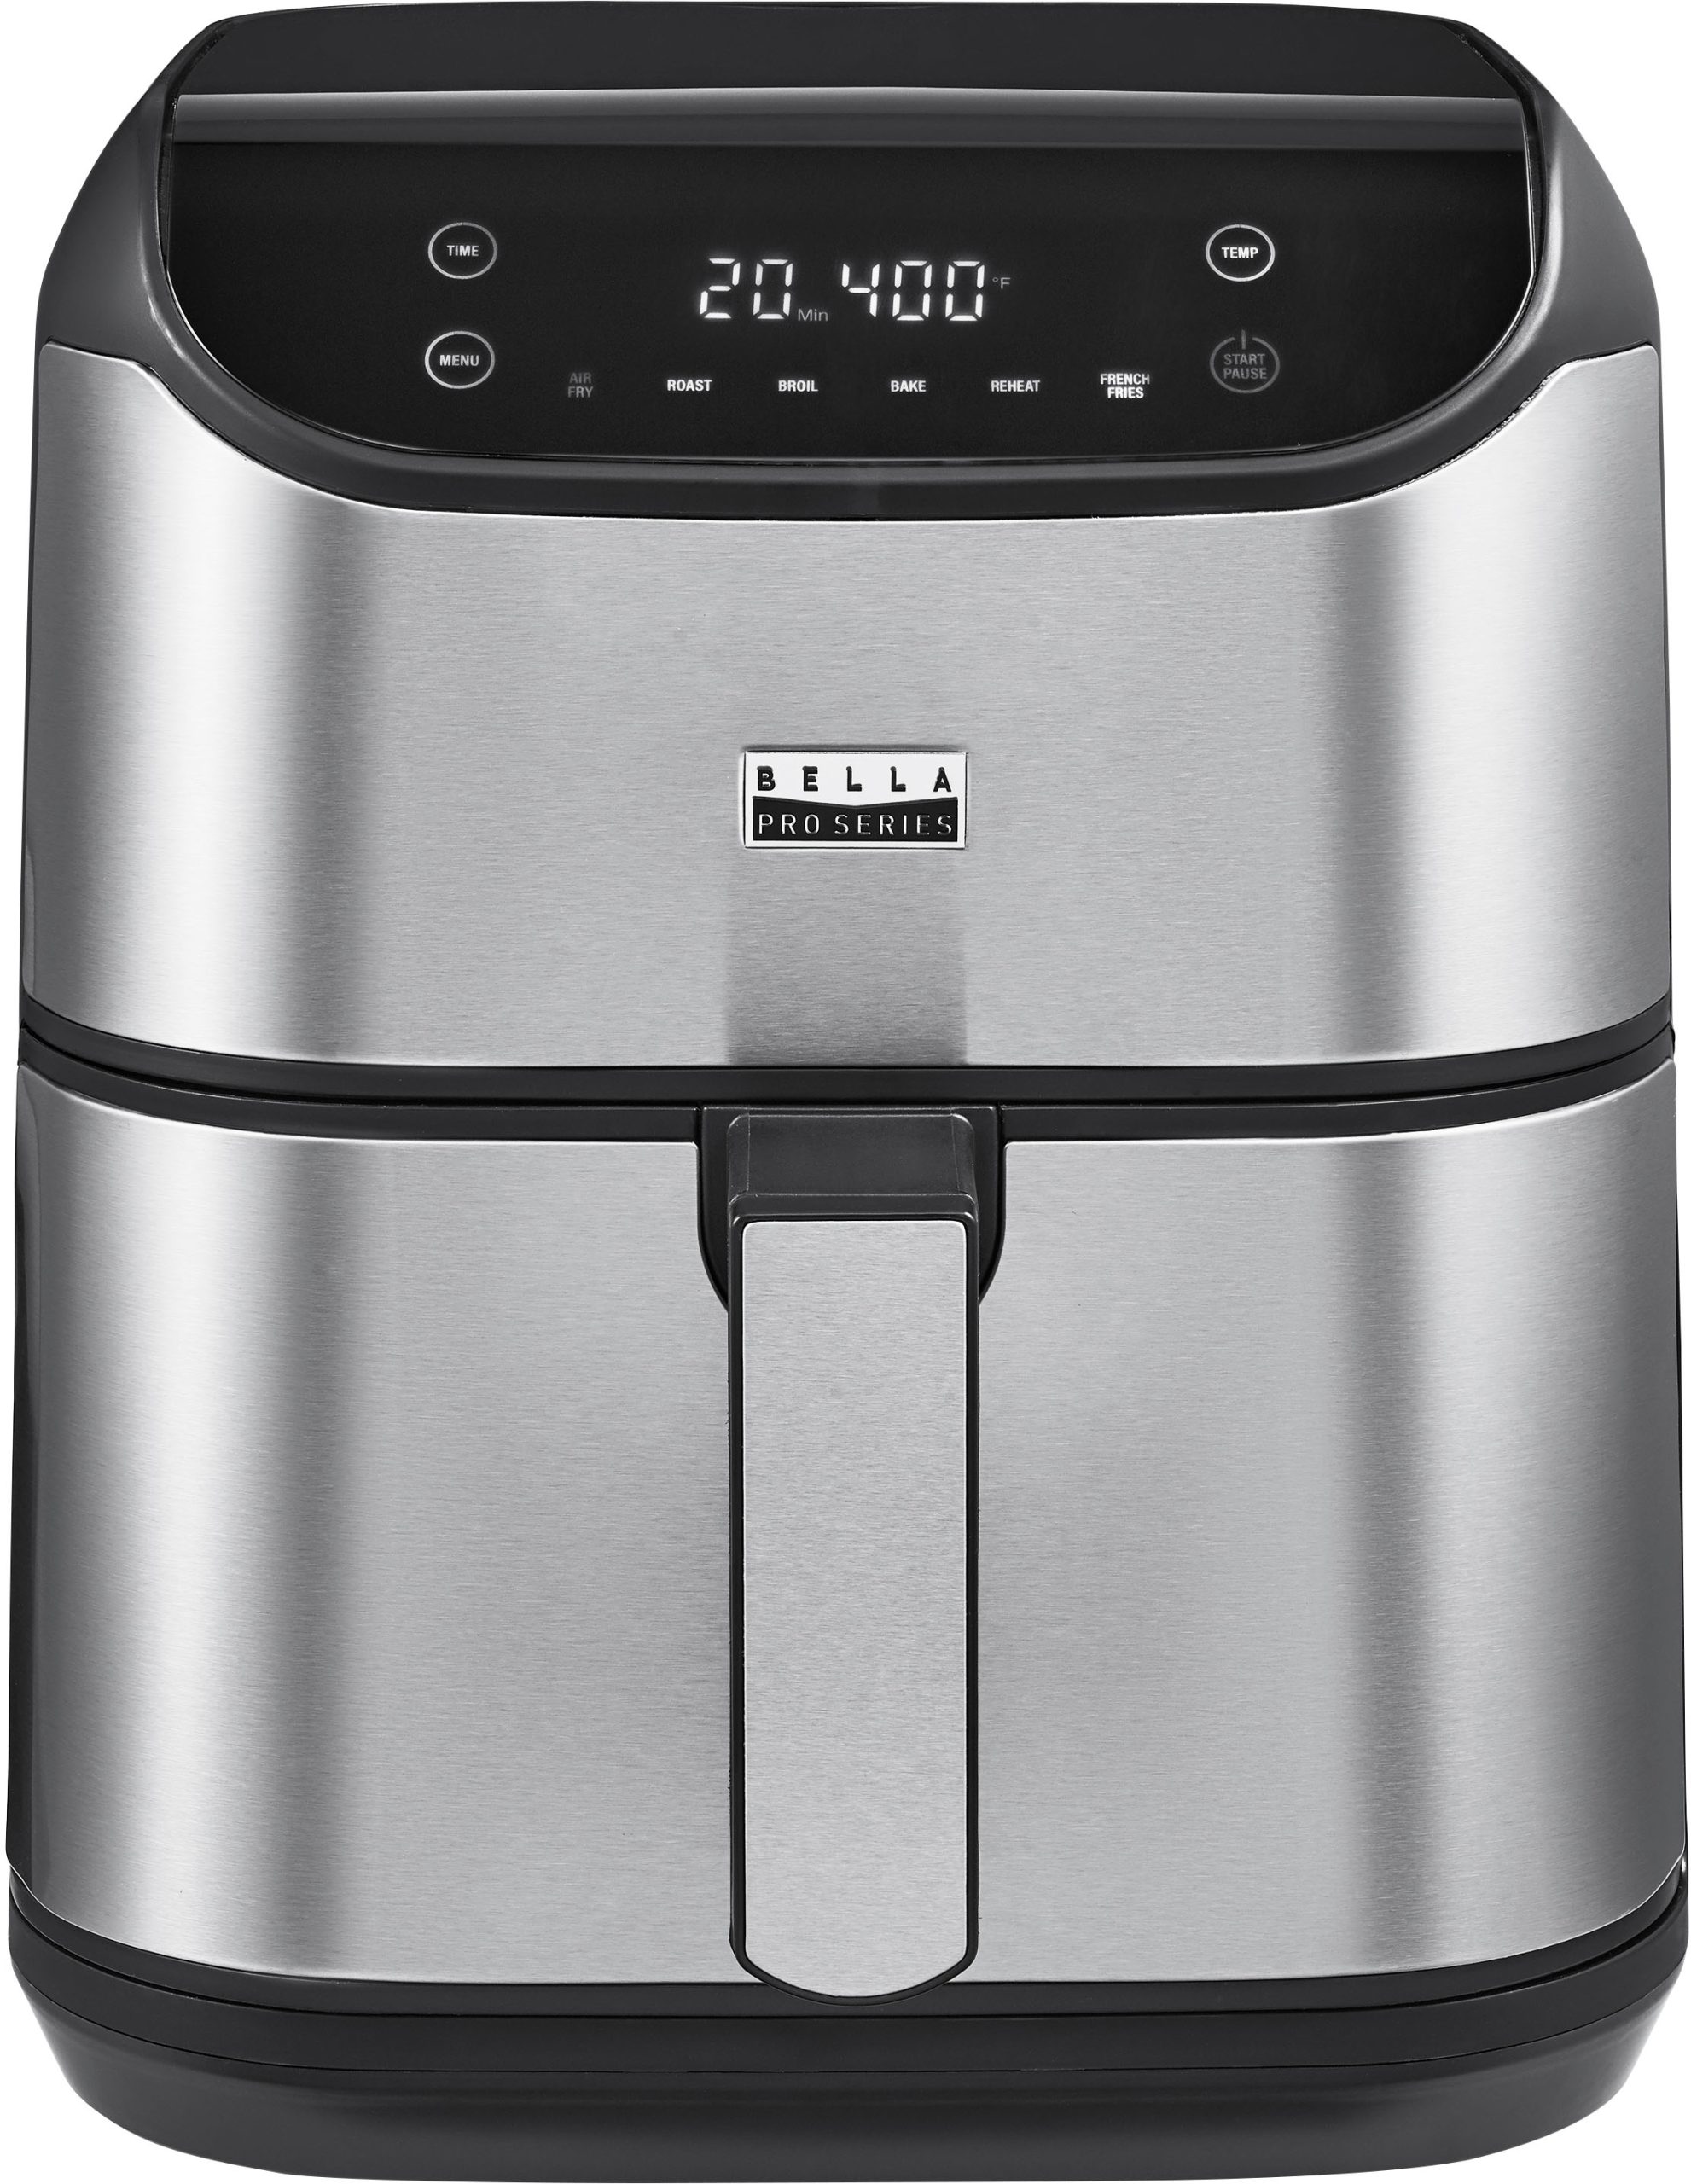 Bella Pro Series – 6-qt. Digital Air Fryer with Stainless Finish – Stainless Steel – Just $49.99 at Best Buy